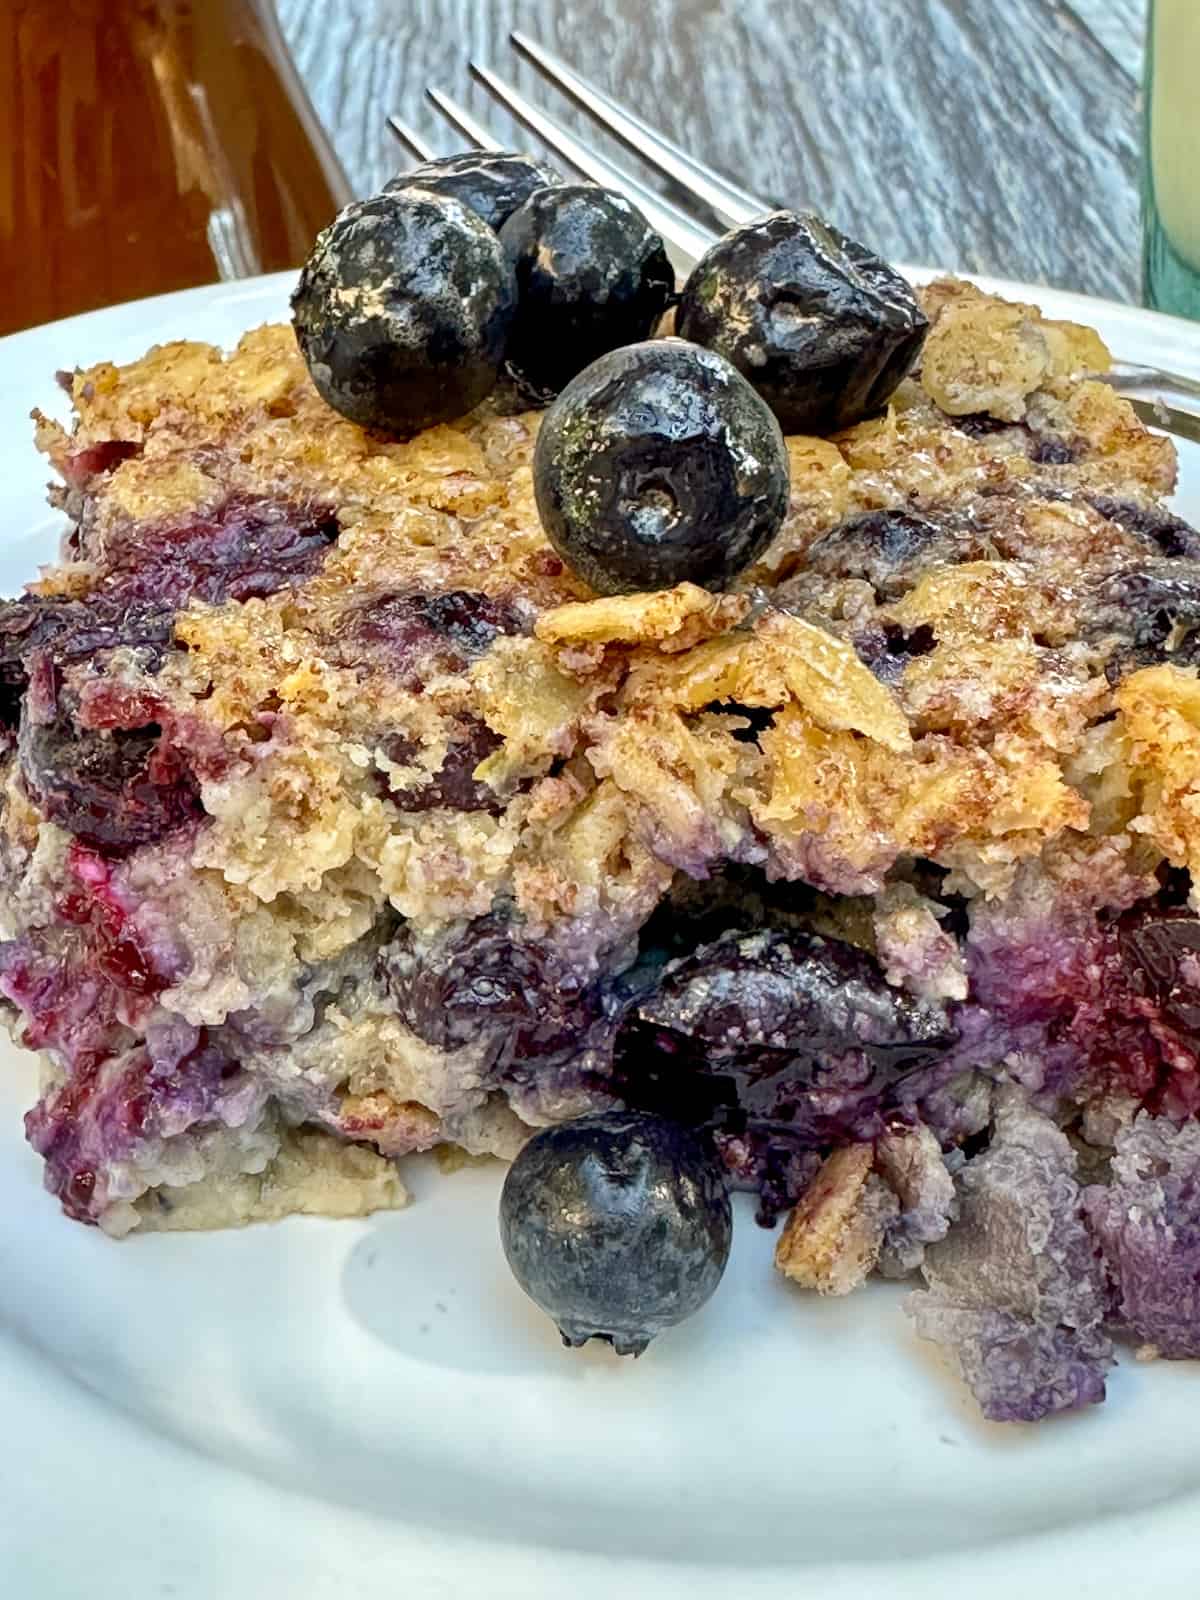 A close shot of a serving a blueberry baked oatmeal with berries on top and on the side.